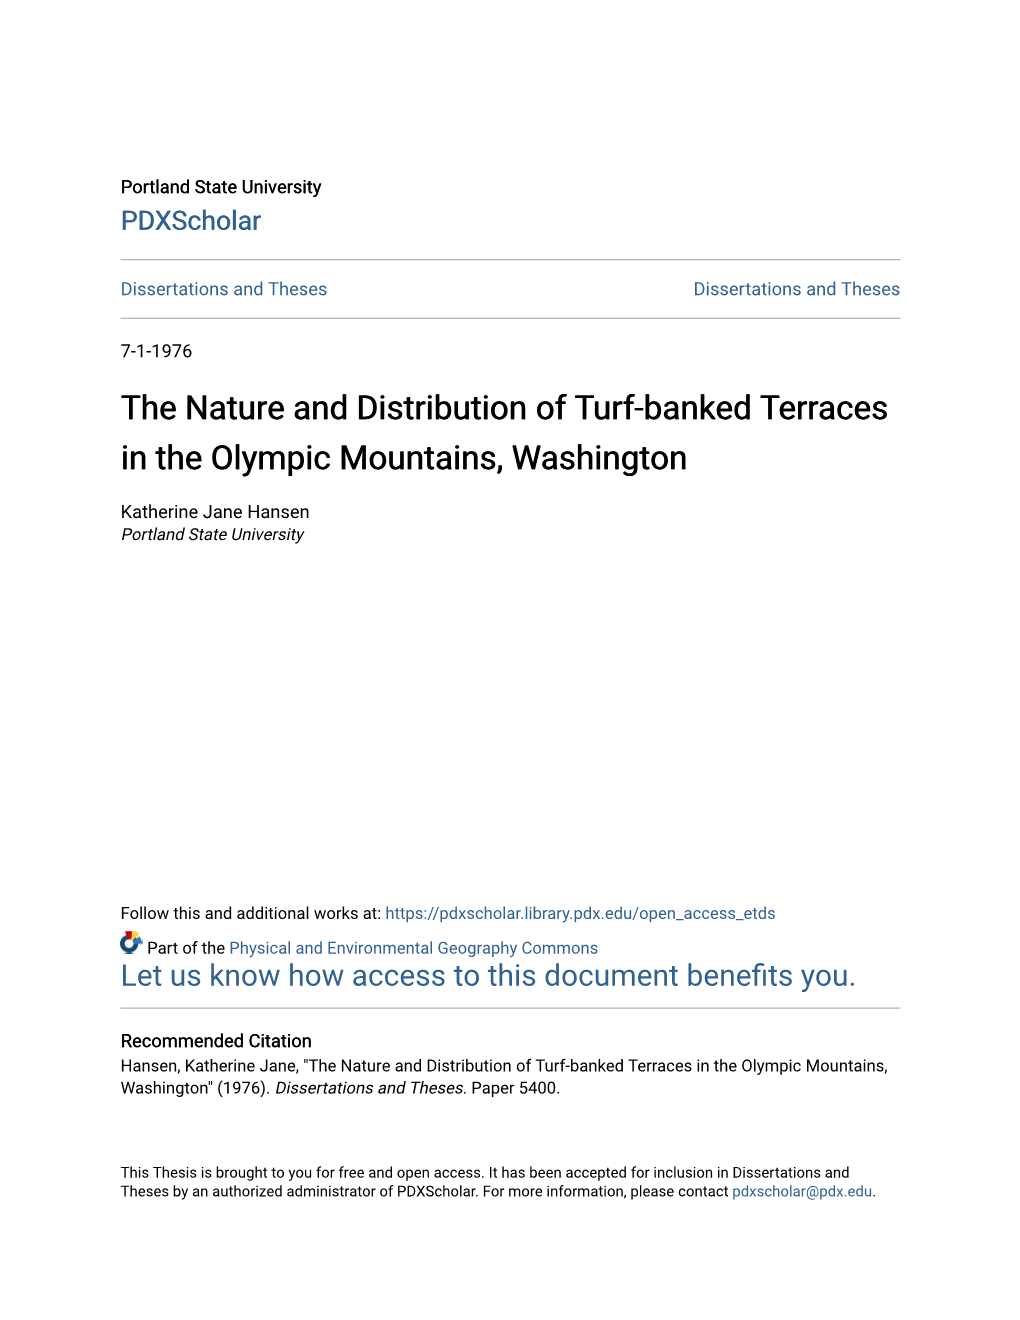 The Nature and Distribution of Turf-Banked Terraces in the Olympic Mountains, Washington